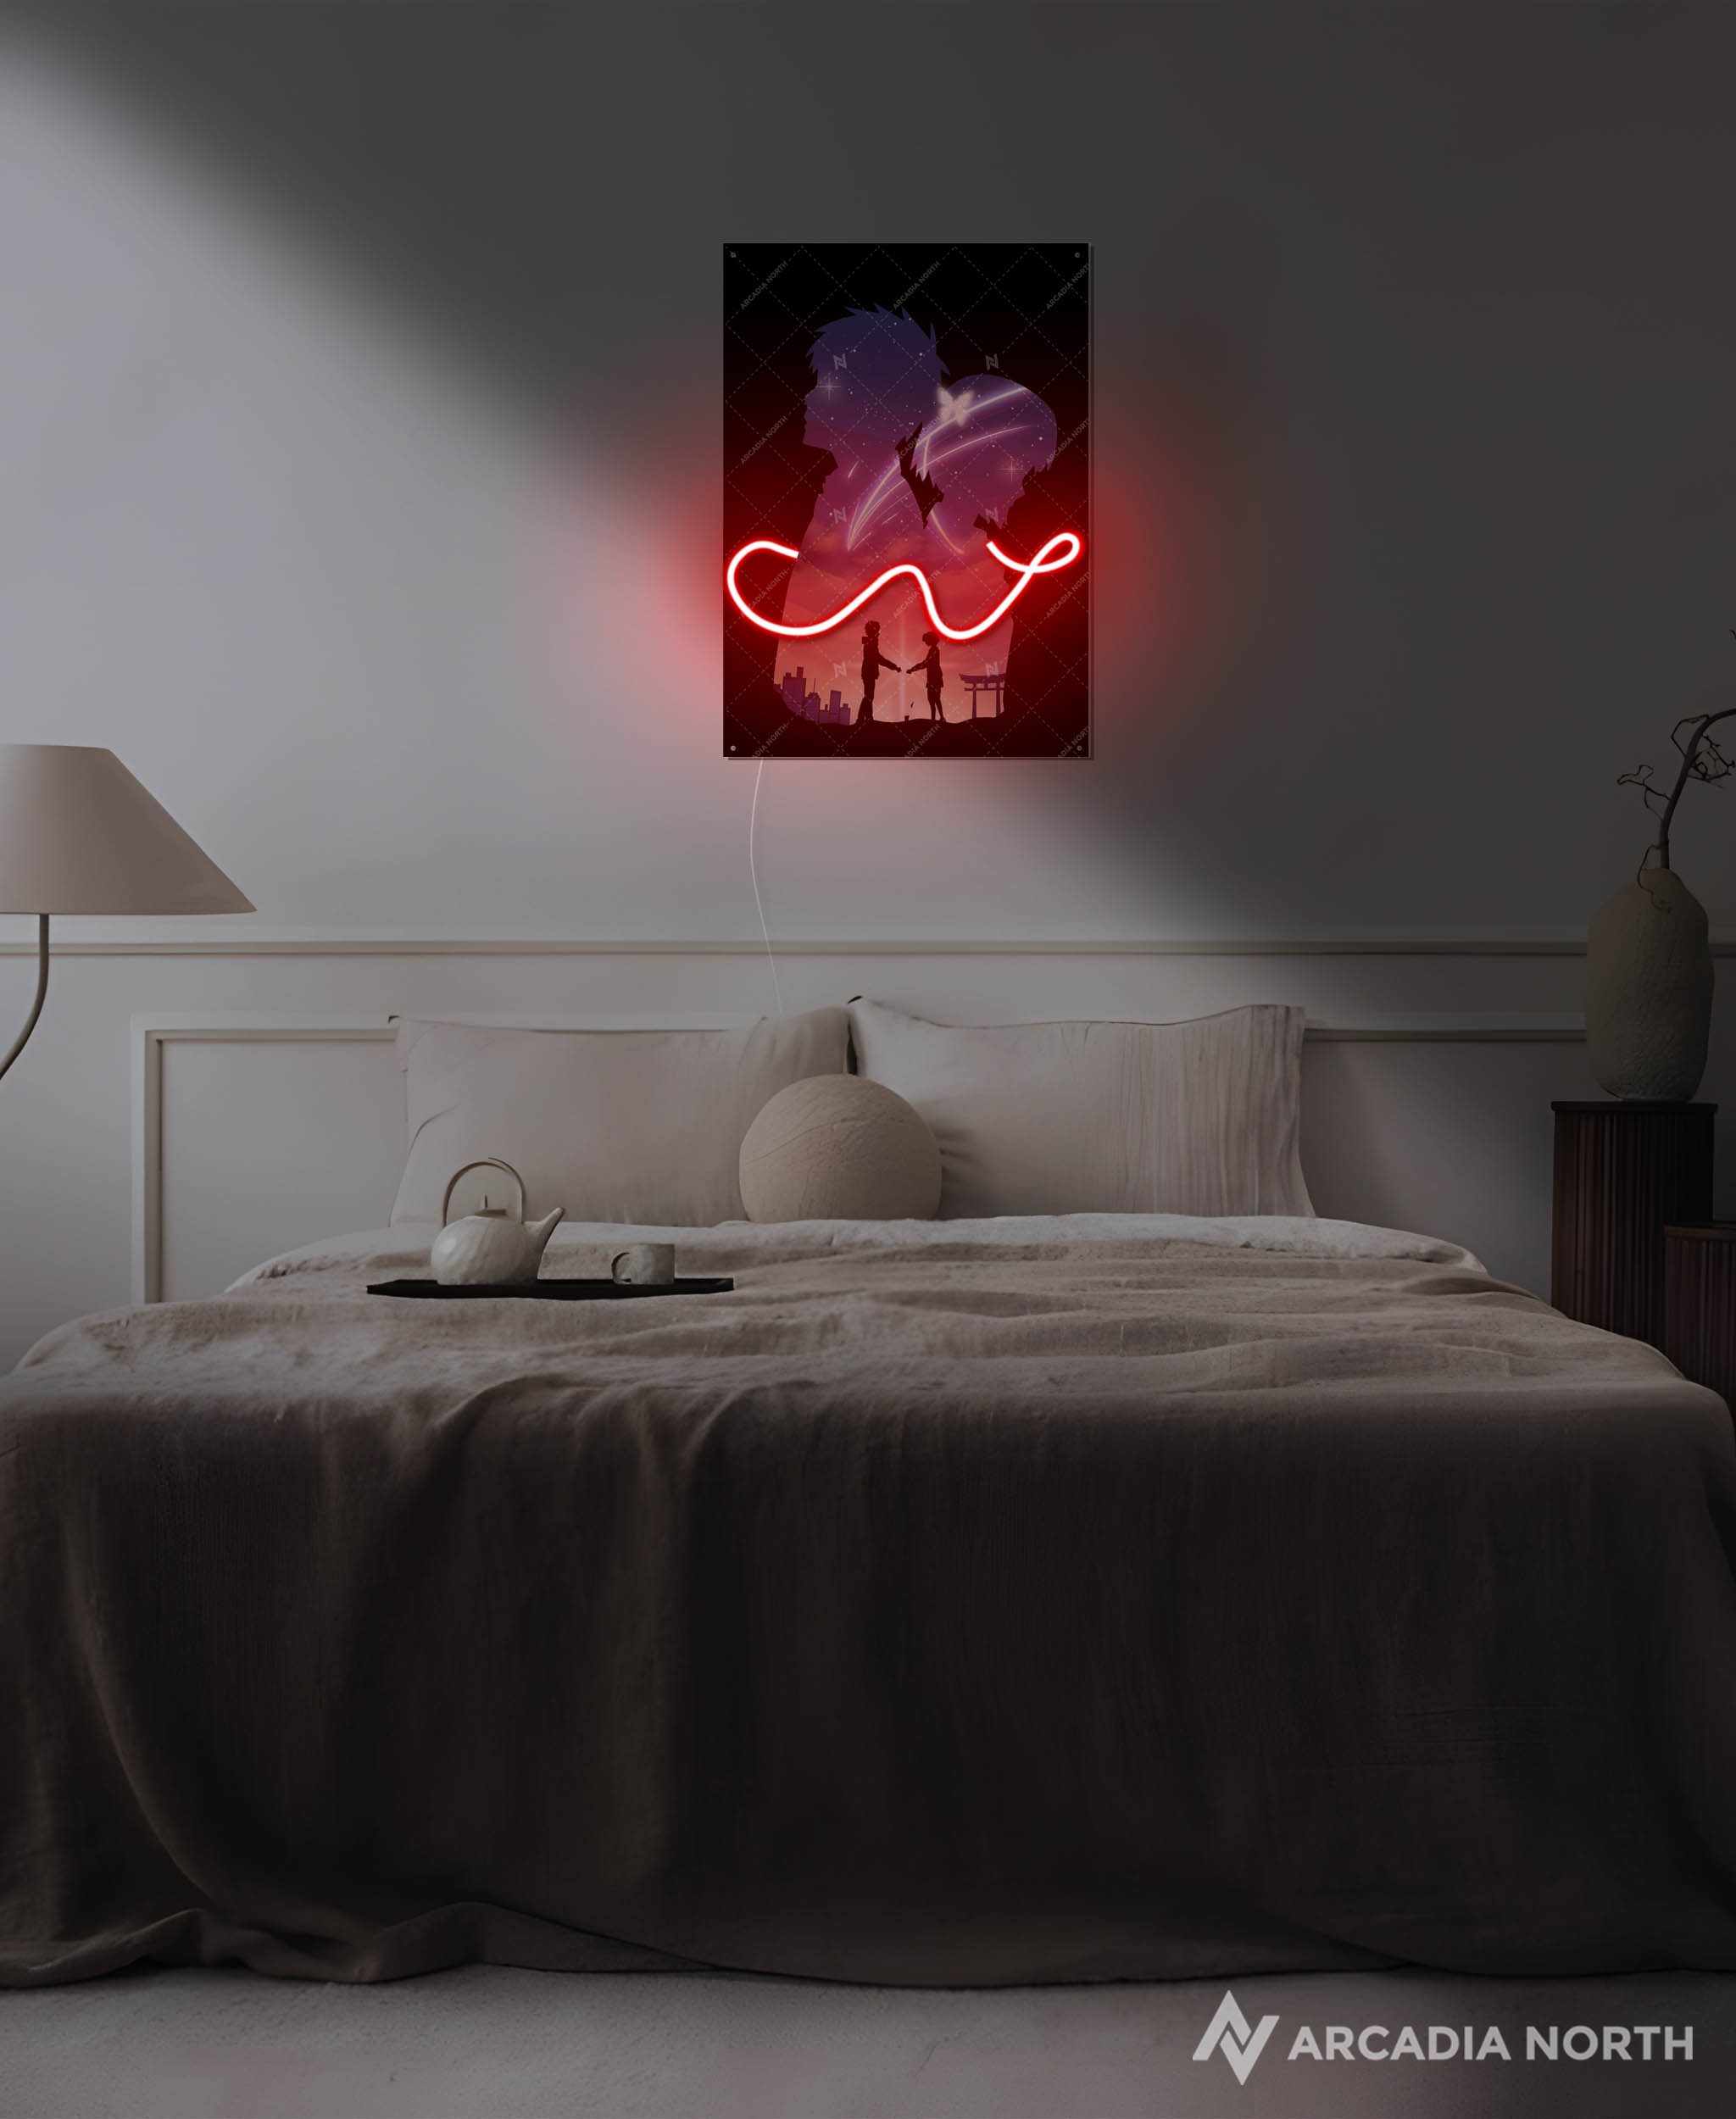 Arcadia North AURALIGHT - an LED Poster featuring the Makoto Shinkai anime Your Name Kimi no Na wa with Mitsuha and Taki connected by the red string of fate. Illuminated by glowing neon LED lights. UV-printed on acrylic.